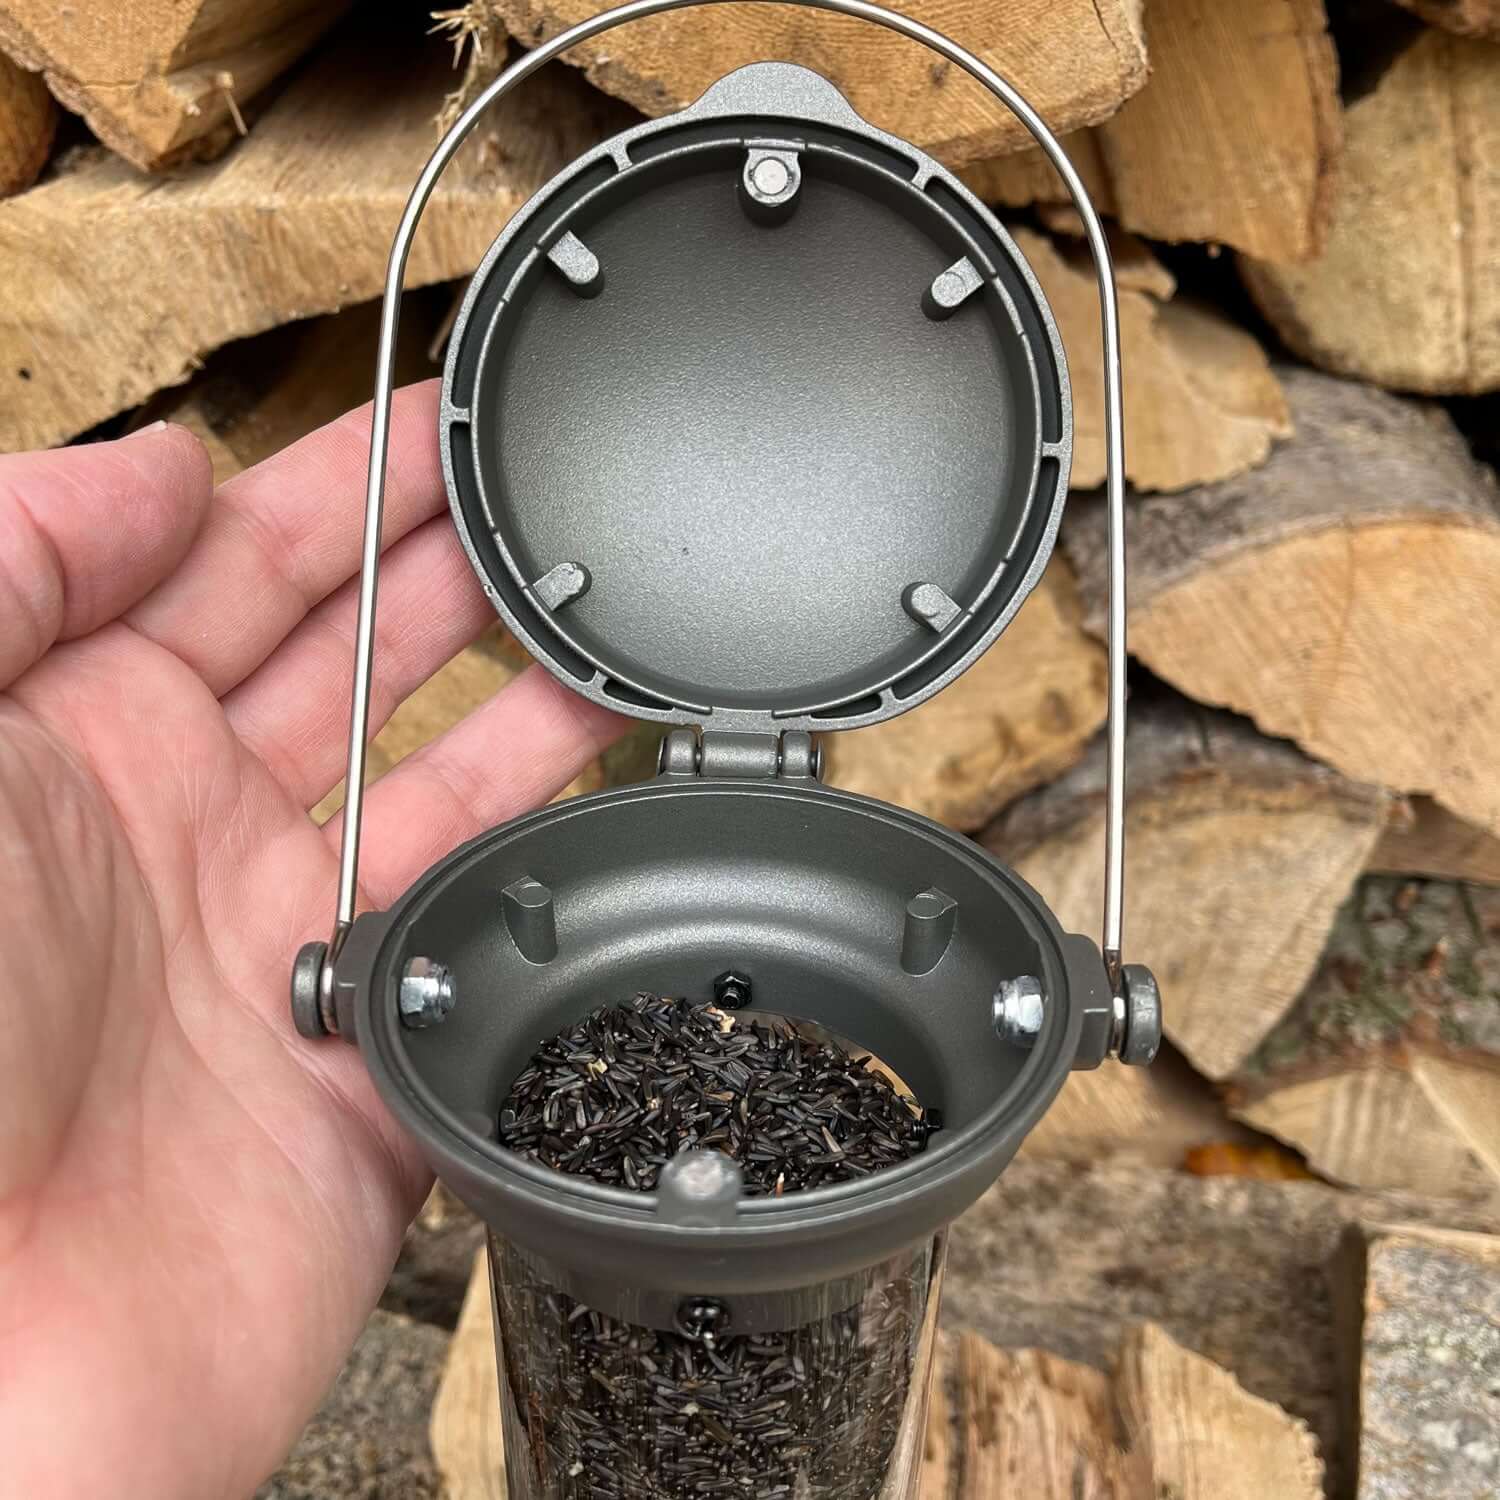 Pewter feeder for niger seed with flick top on a hinge so can be opened easily.